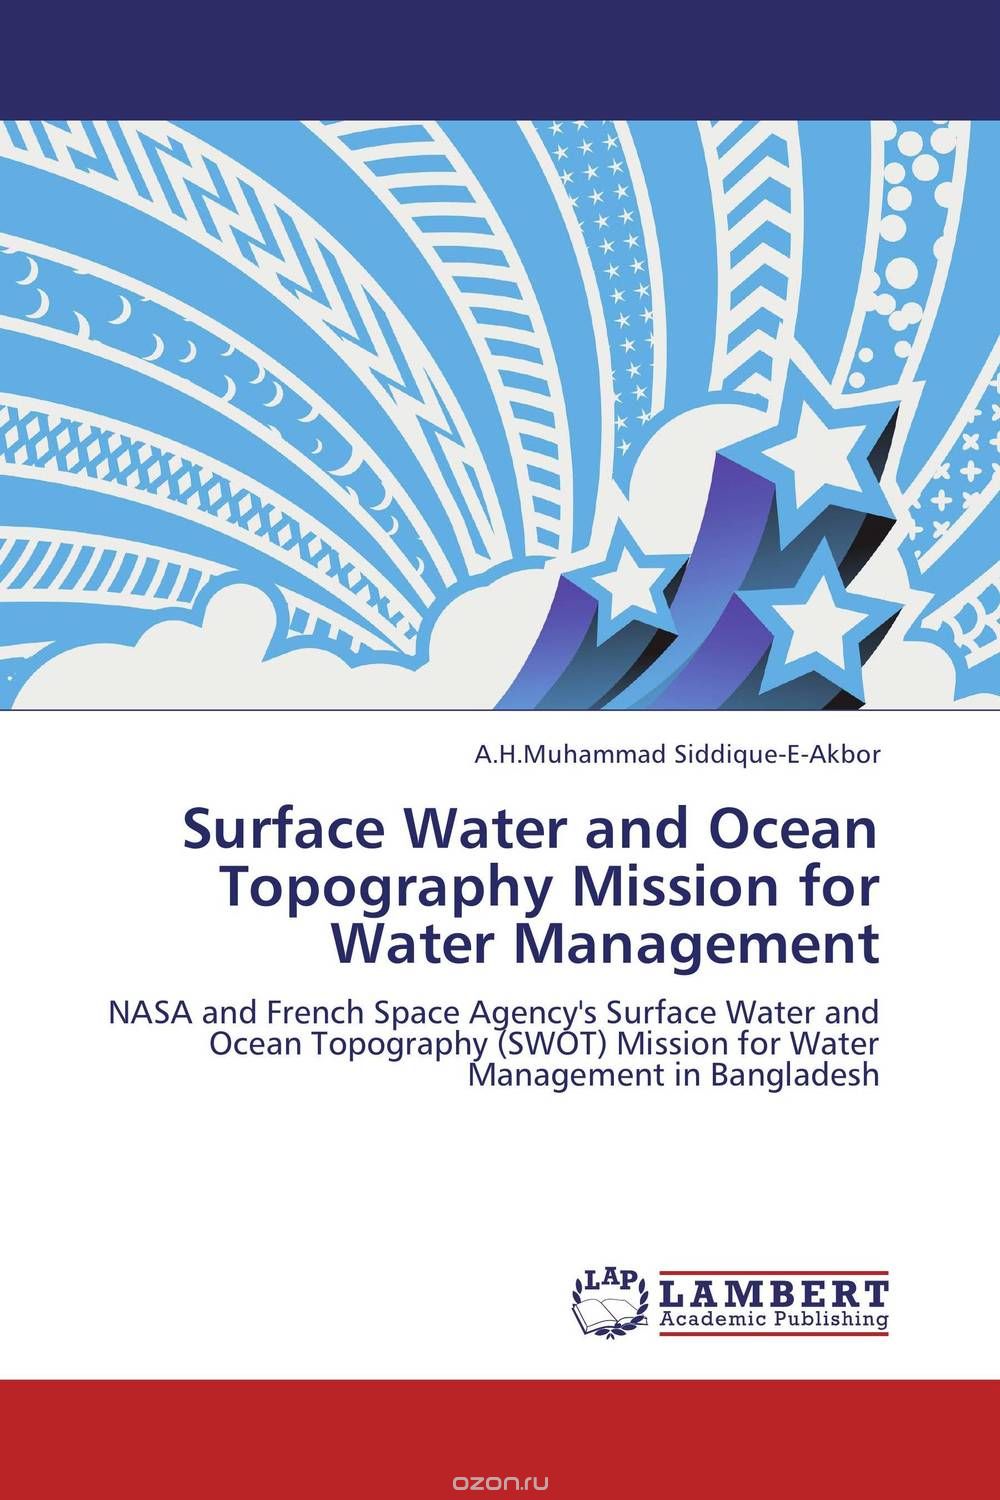 Скачать книгу "Surface Water and Ocean Topography Mission for Water Management"